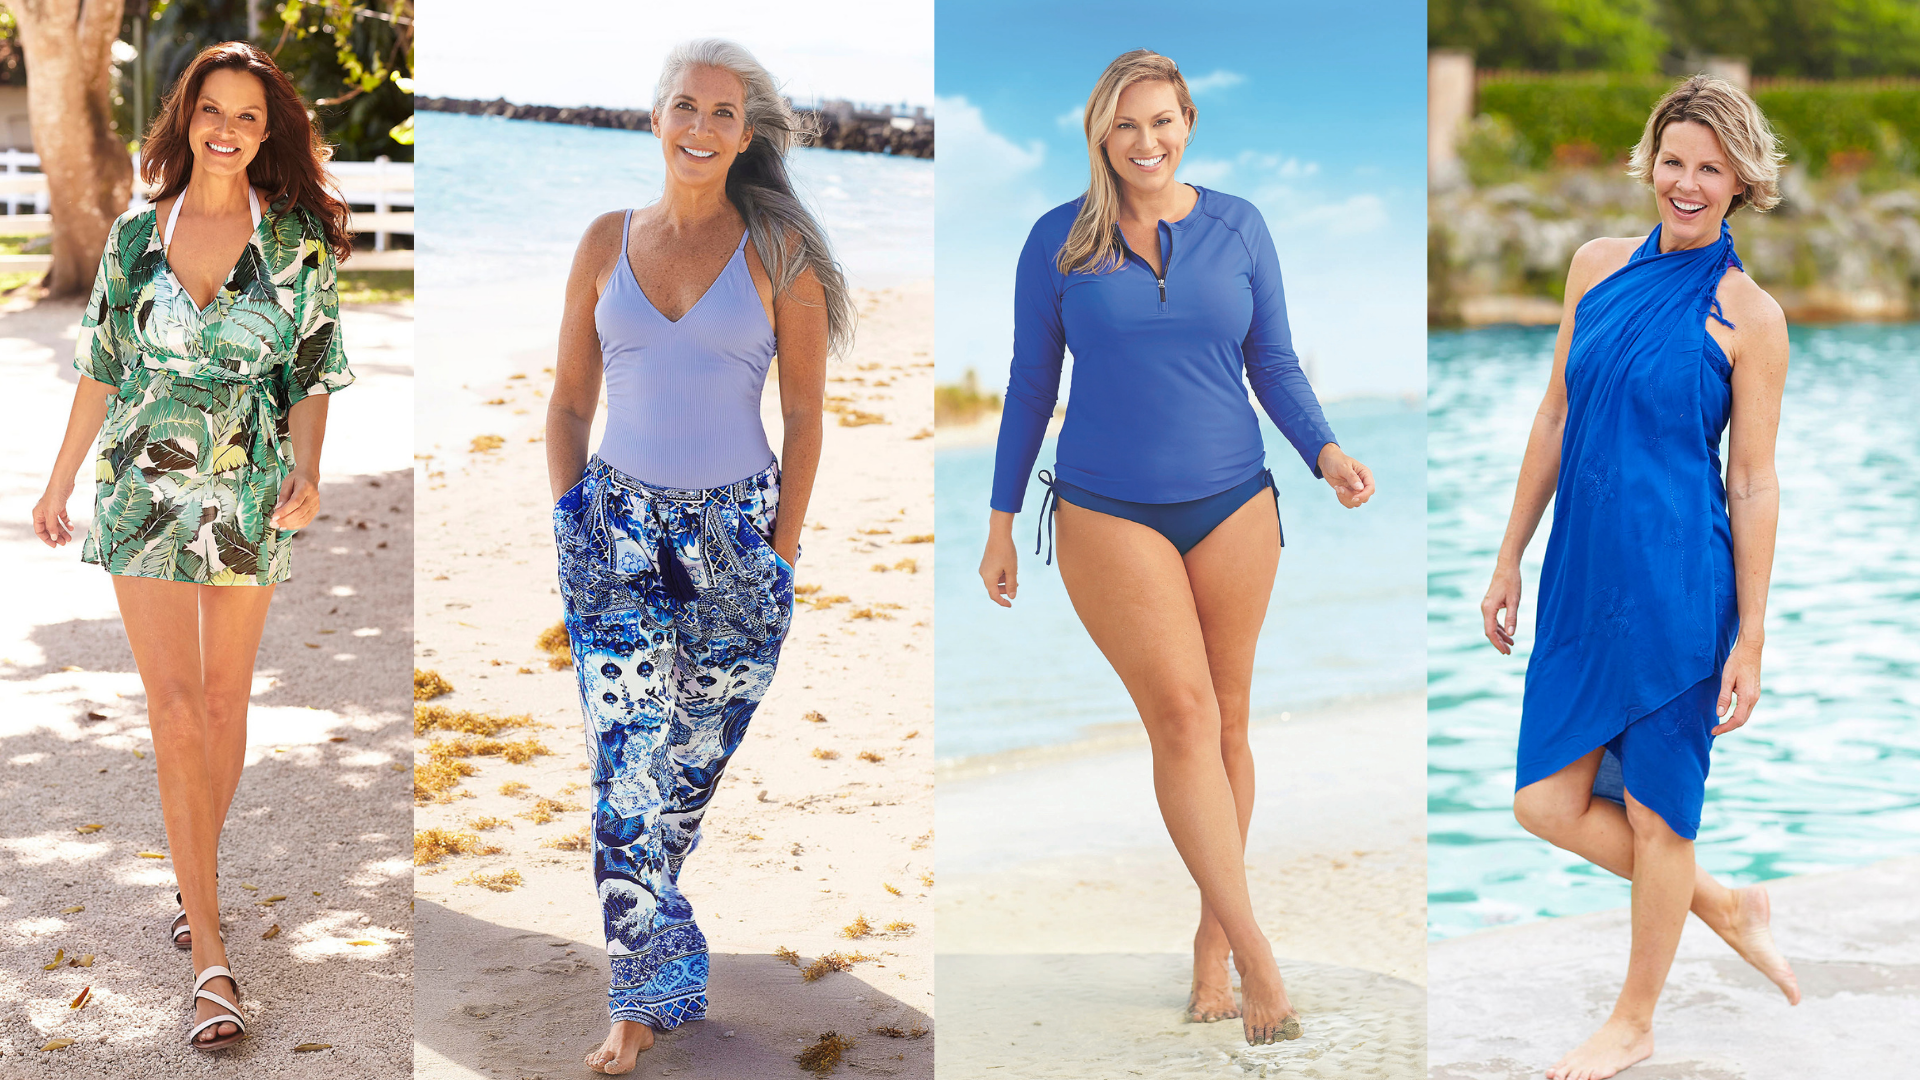 4 Swim Cover-Ups That Will Flatter Your Figure